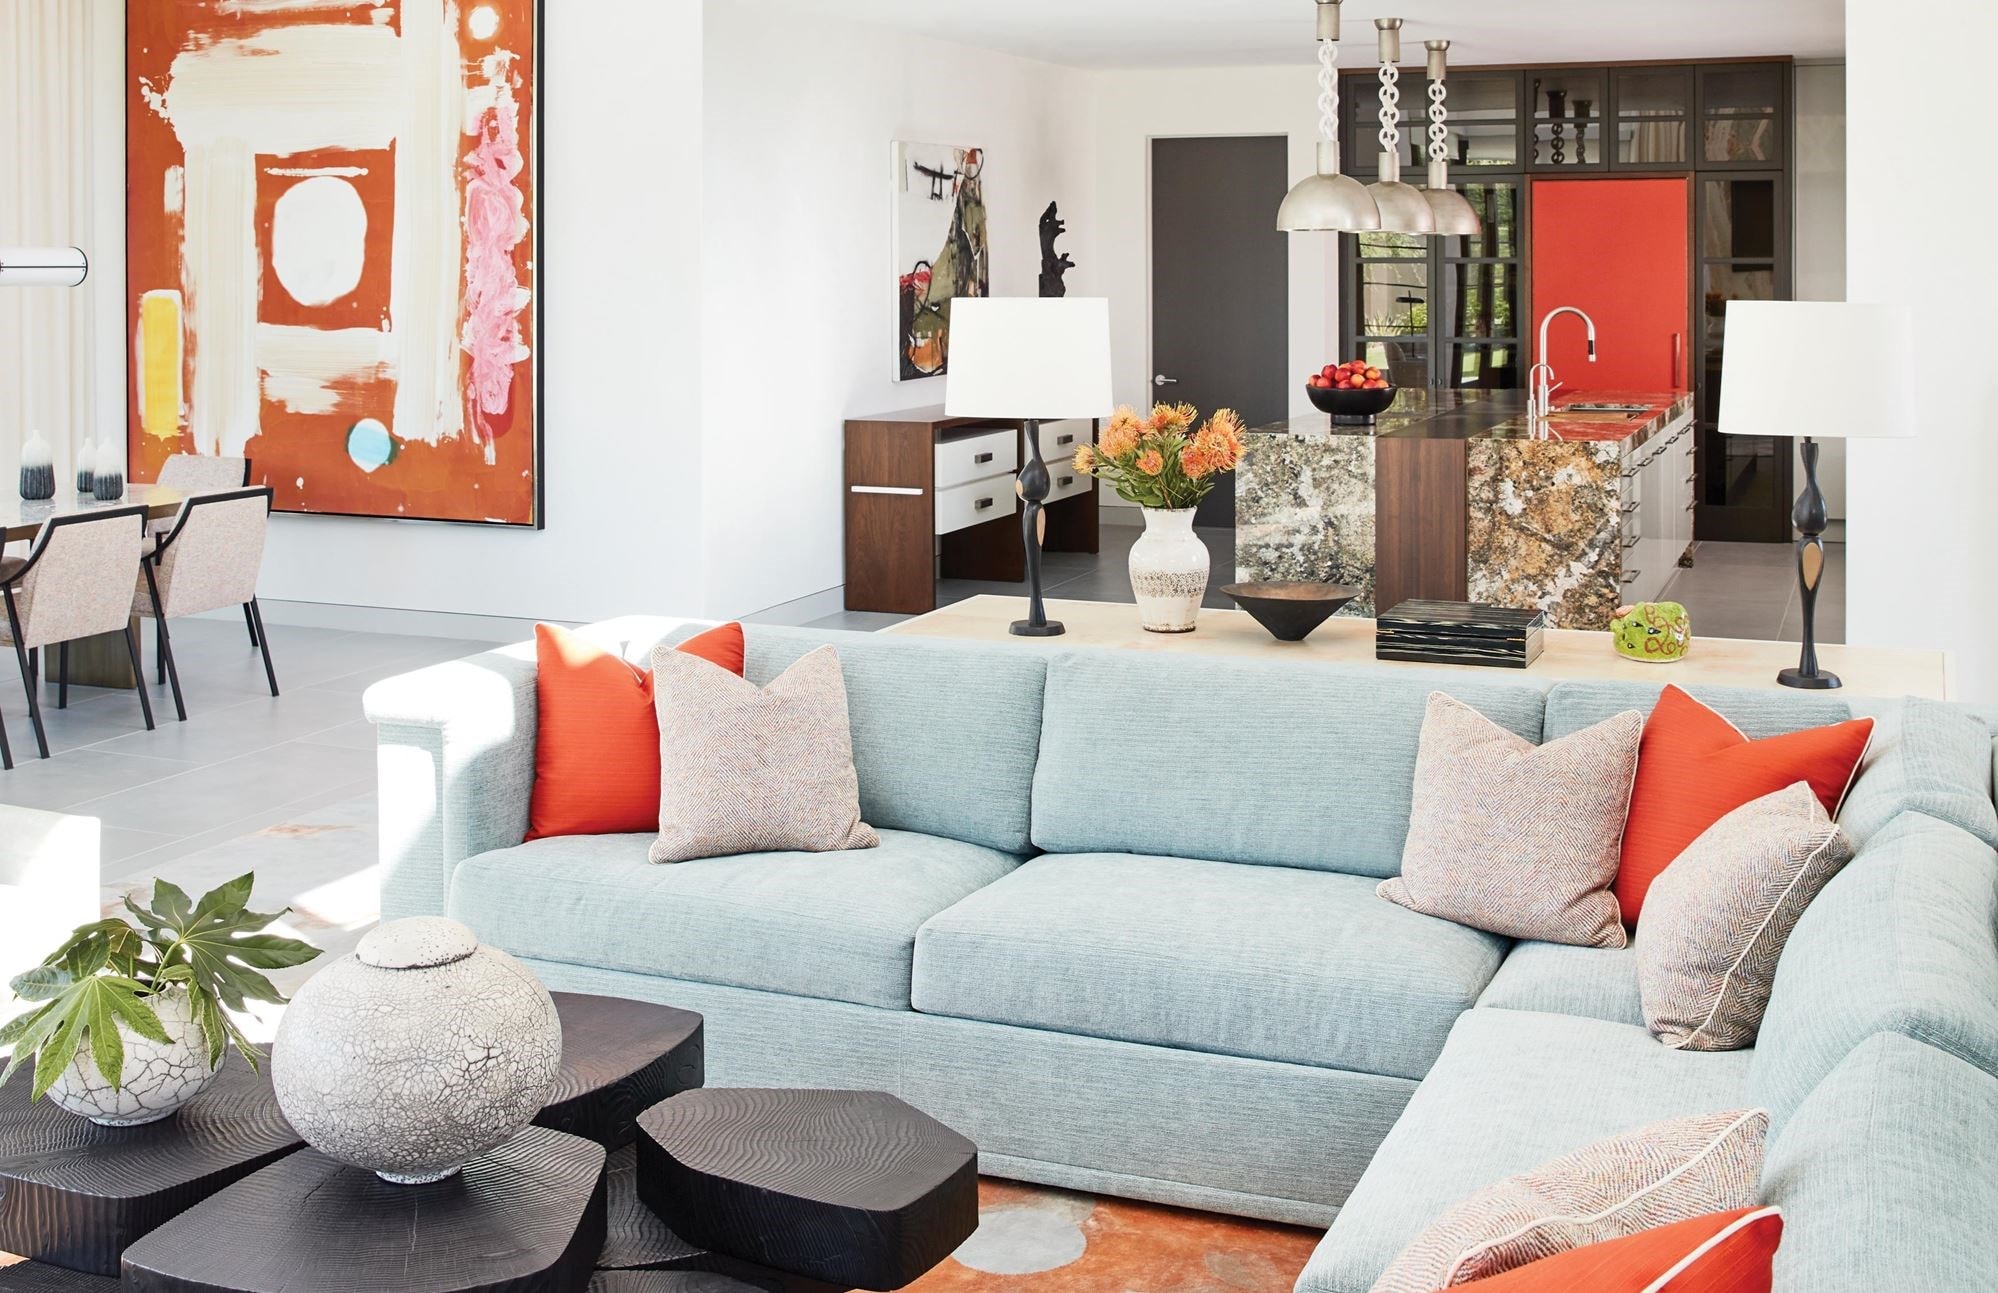 An eclectic palette of hot and cool colors is displayed throughout this contemporary arizona home